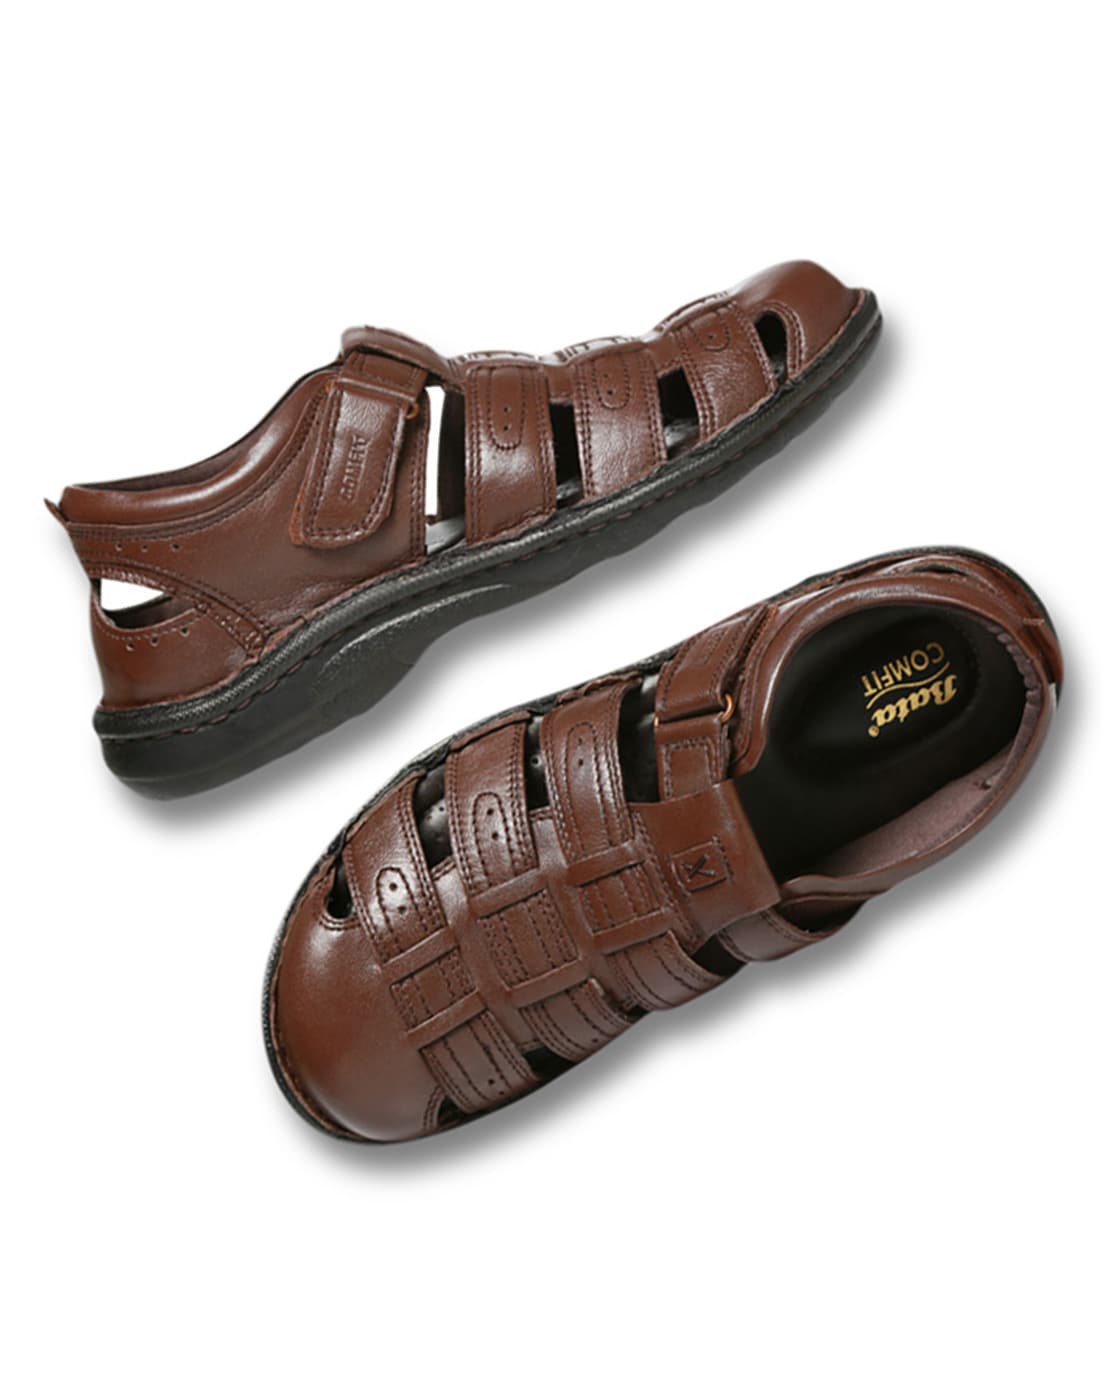 Bata Grey Sandals For Girls 3 in Delhi at best price by New Collection  Footwear  Justdial